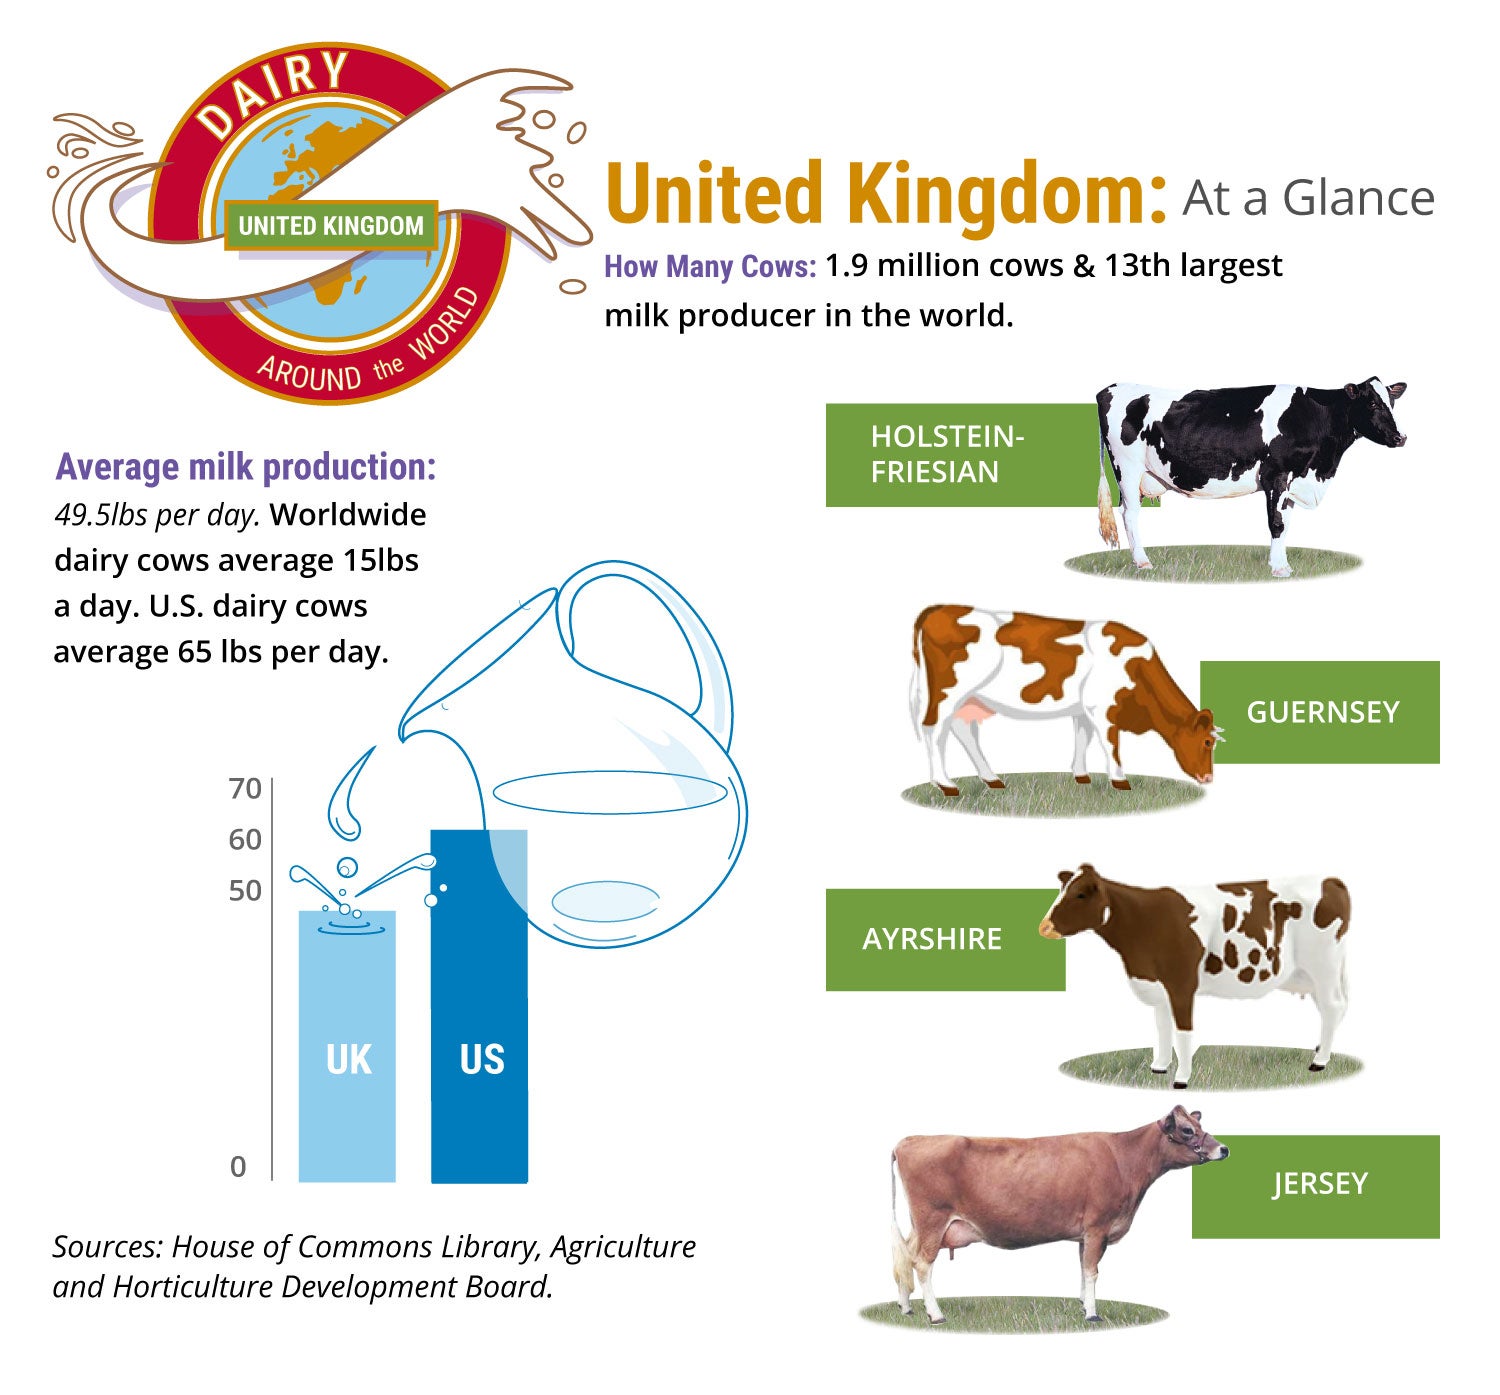 Dairy Around the World infographic depicting overall issues affecting UK dairy farmers